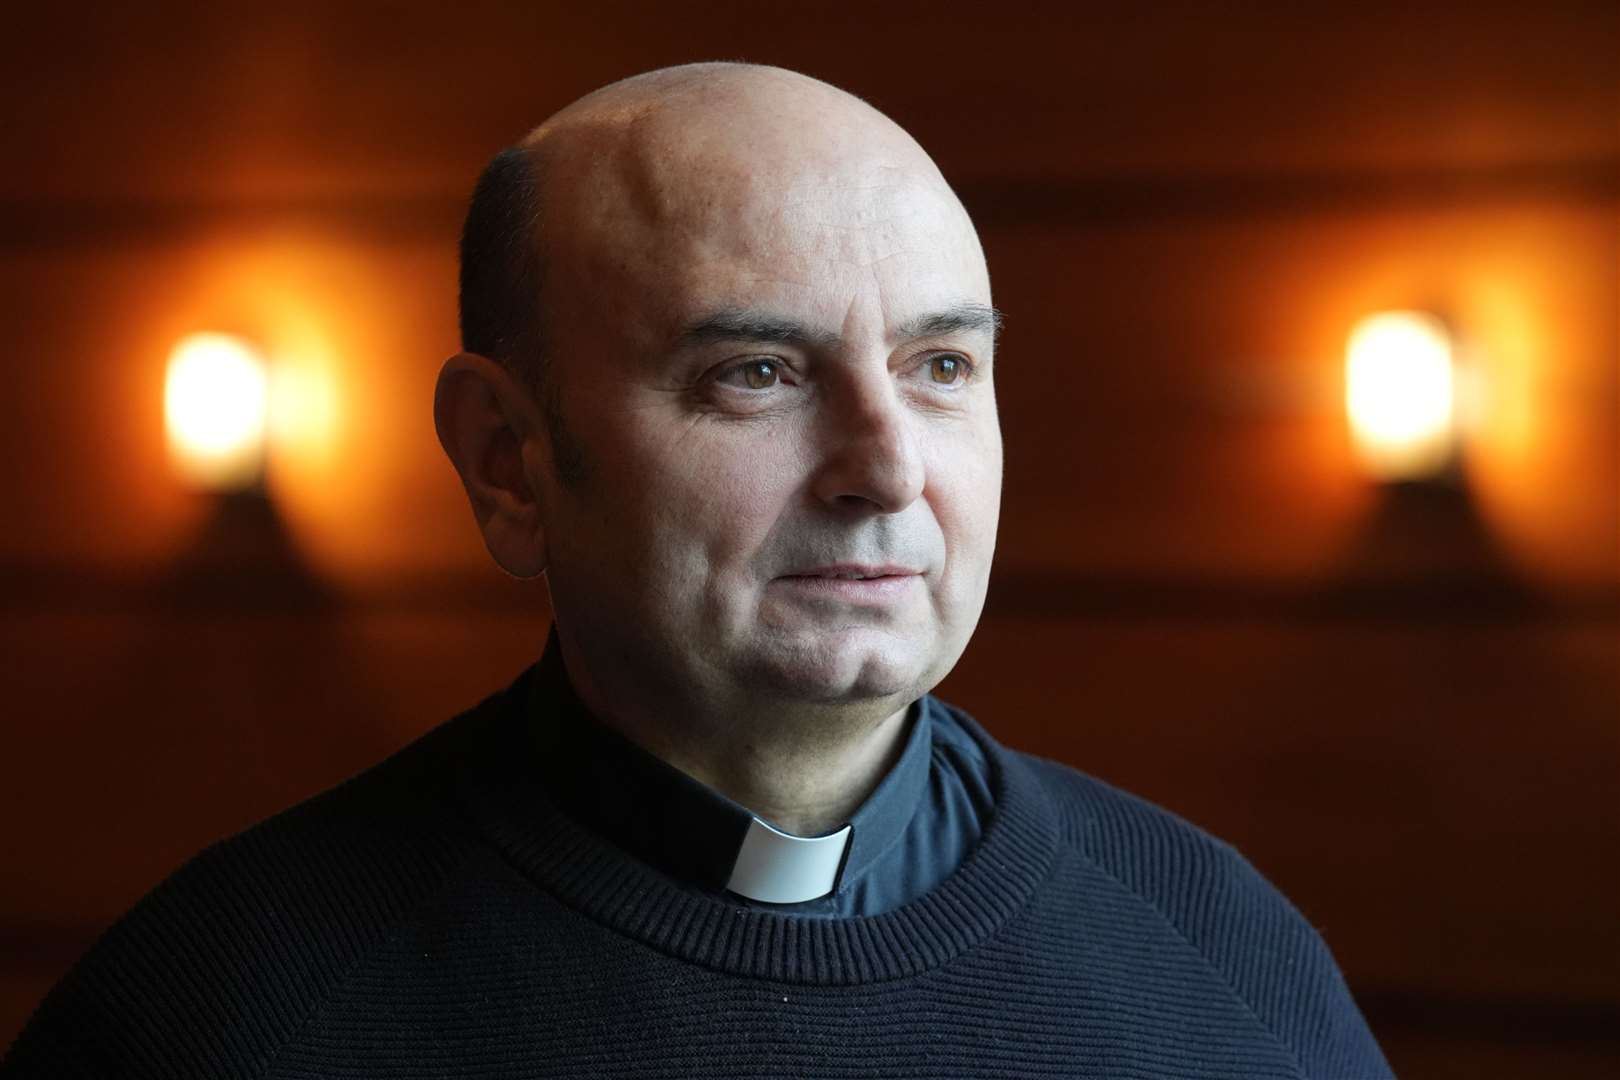 Father Gabriel Romanelli called for a ceasefire to allow a dialogue aimed at ending the conflict (Andrew Milligan/PA)